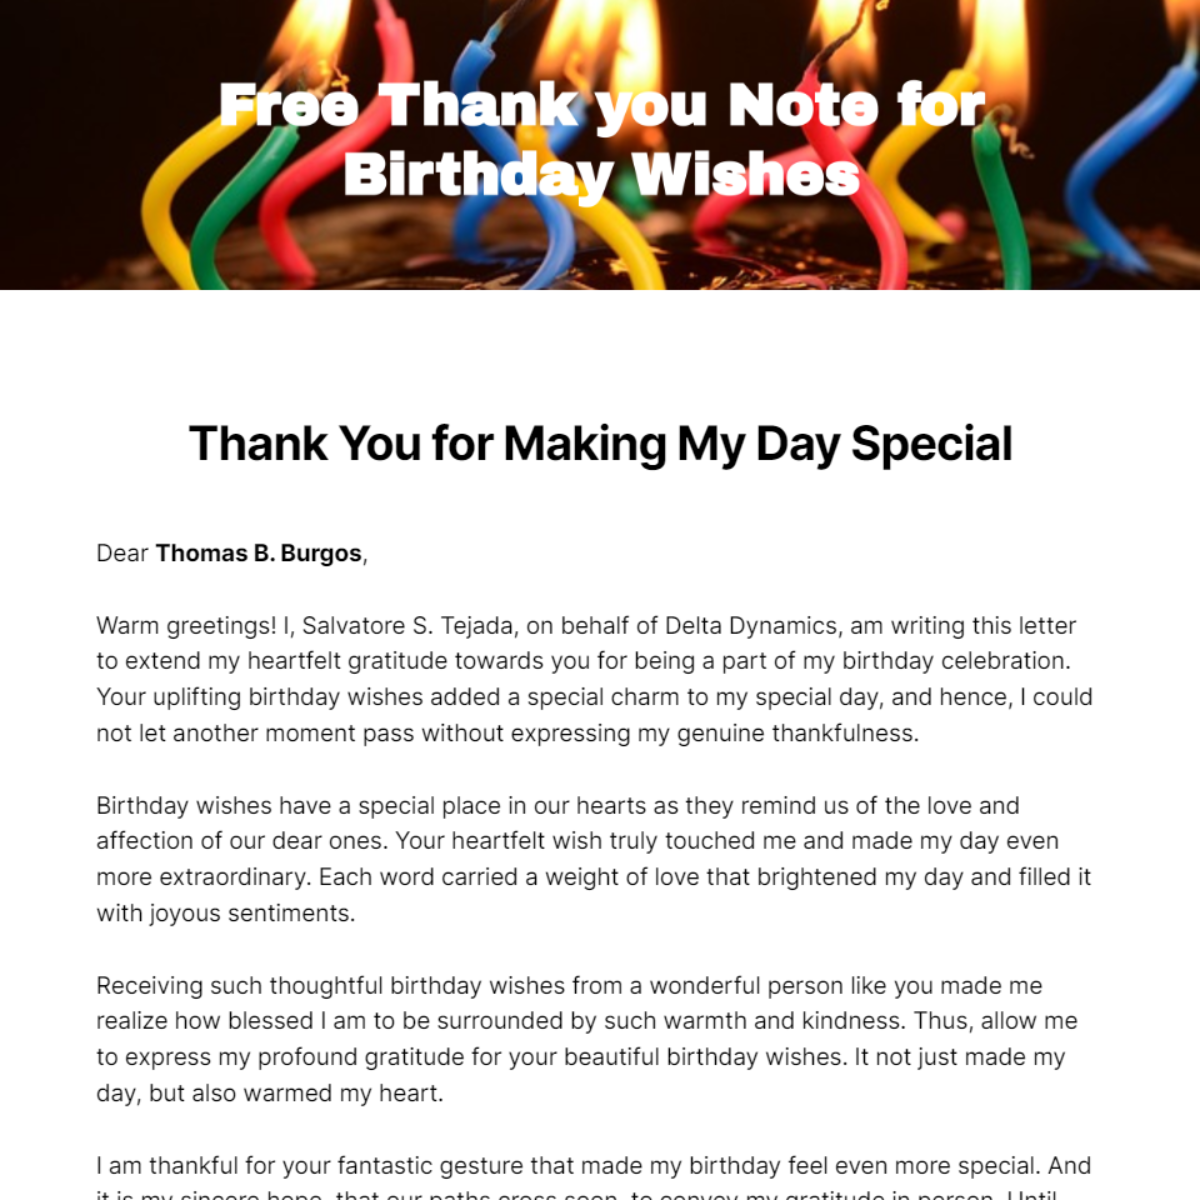 Thank you Note for Birthday Wishes Template